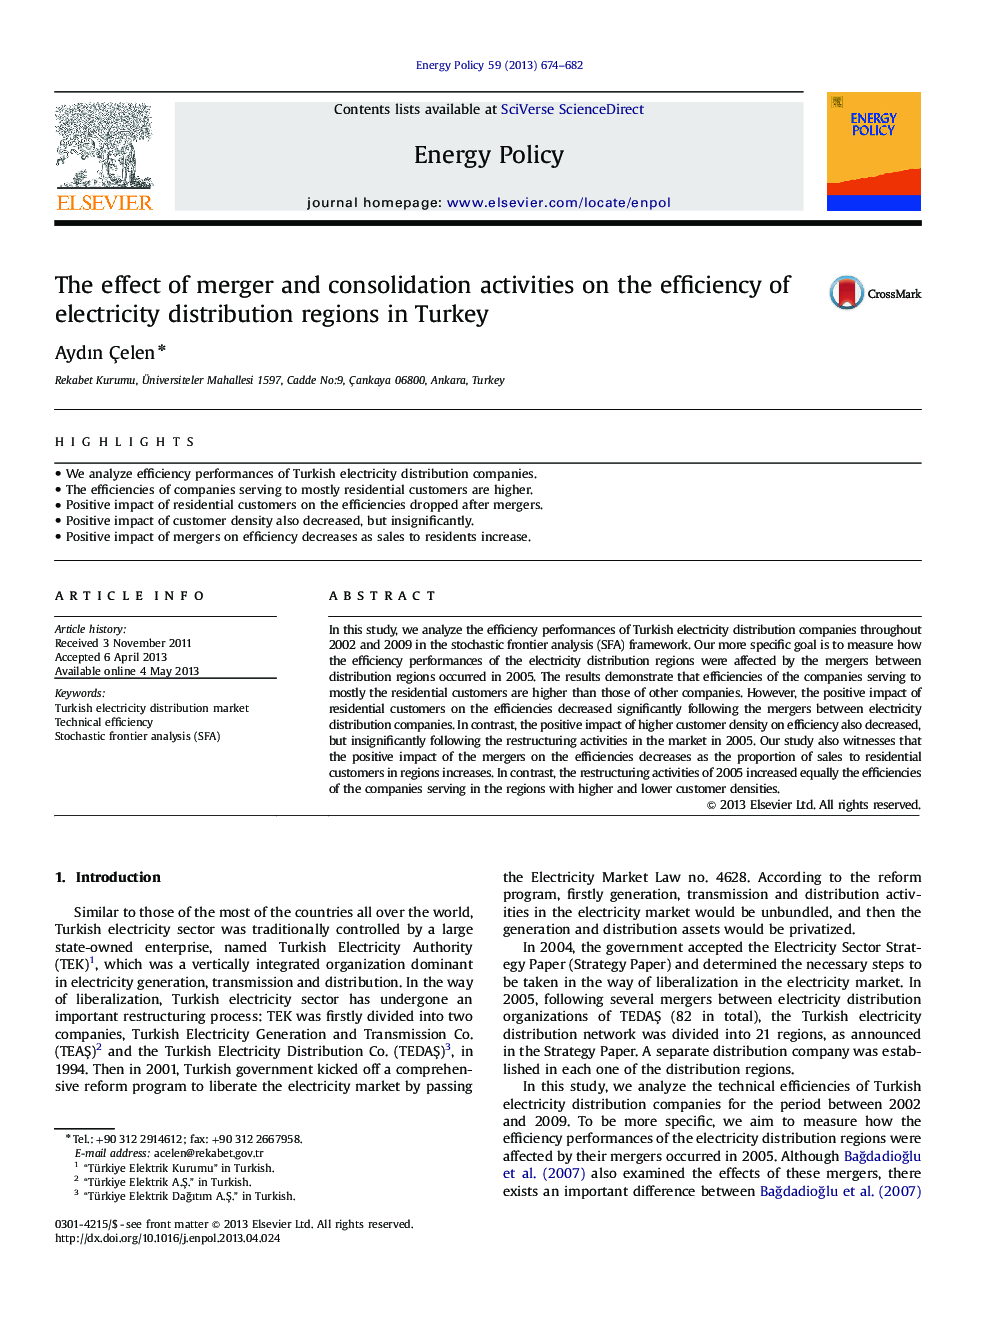 The effect of merger and consolidation activities on the efficiency of electricity distribution regions in Turkey